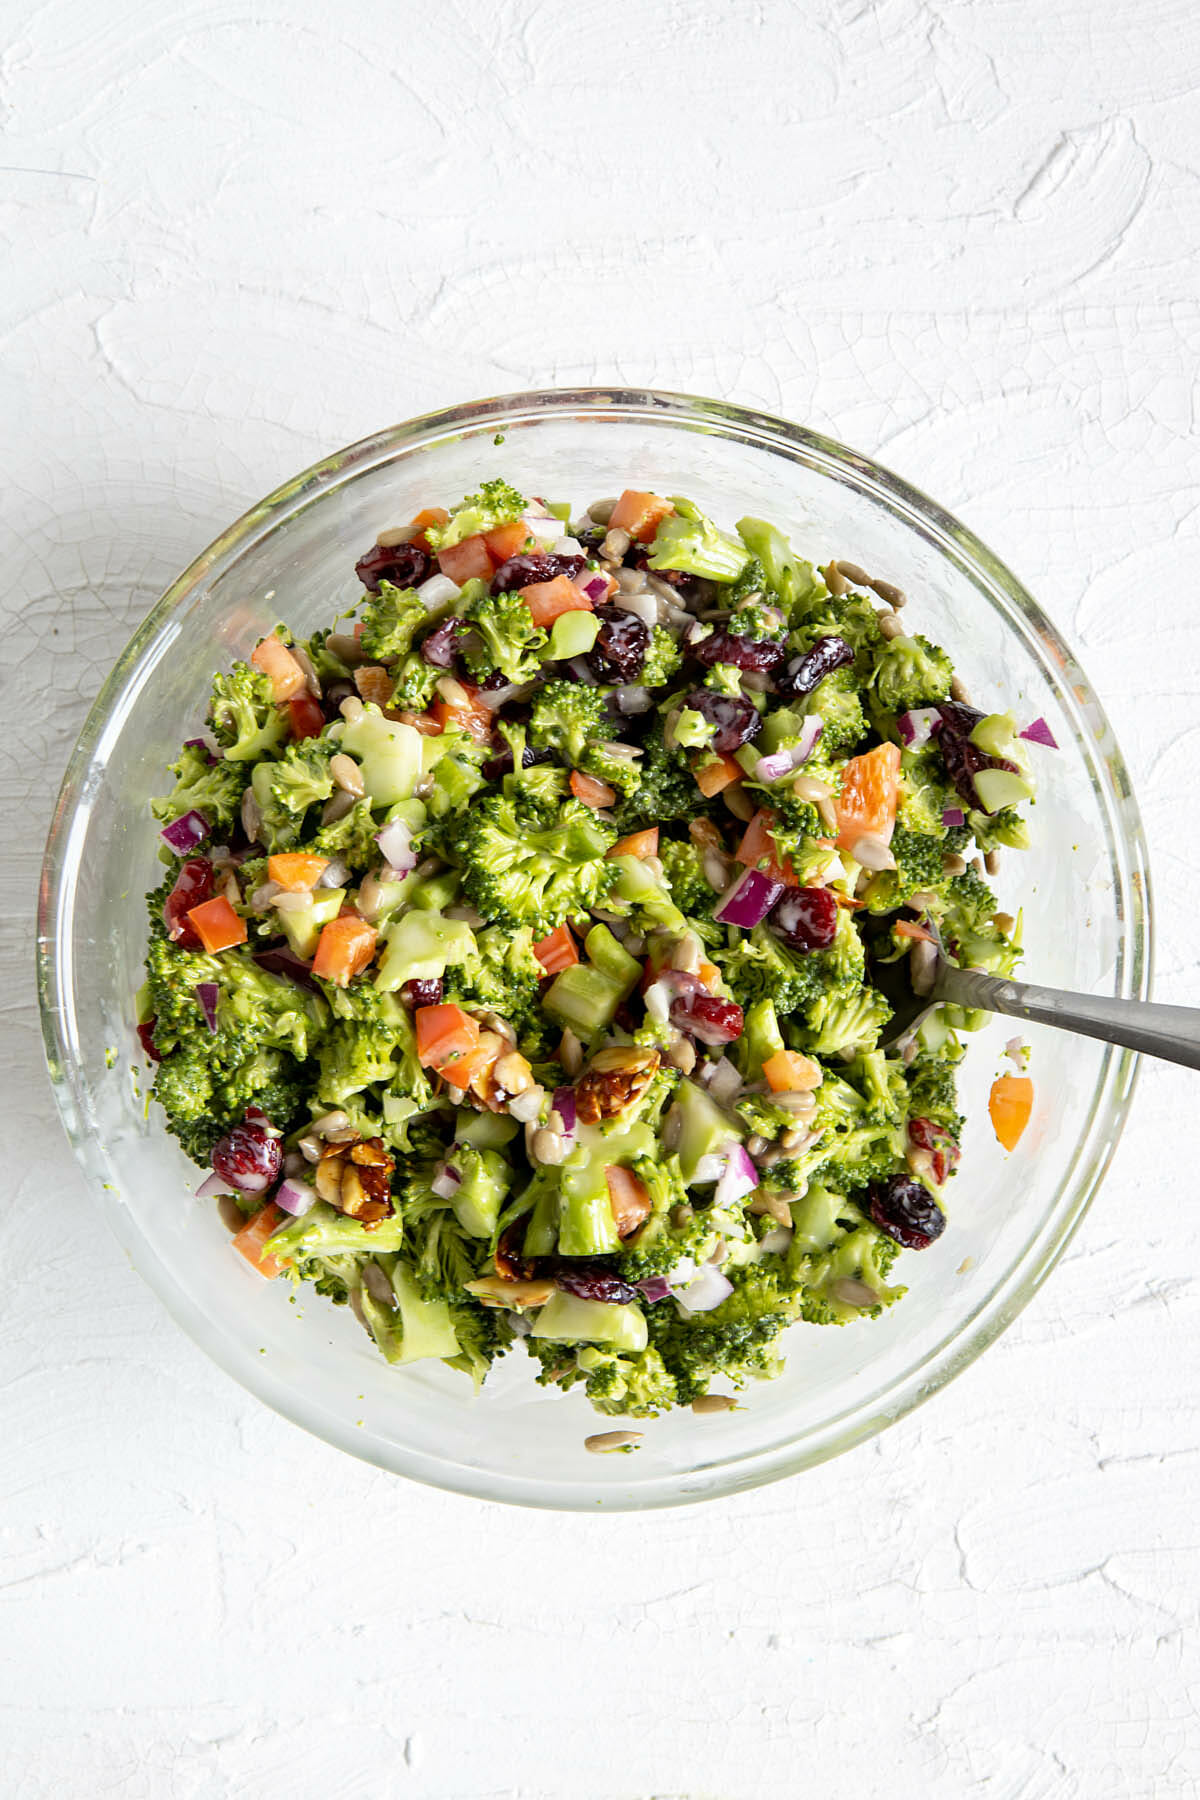 Vegan broccoli salad in a bowl after mixing.